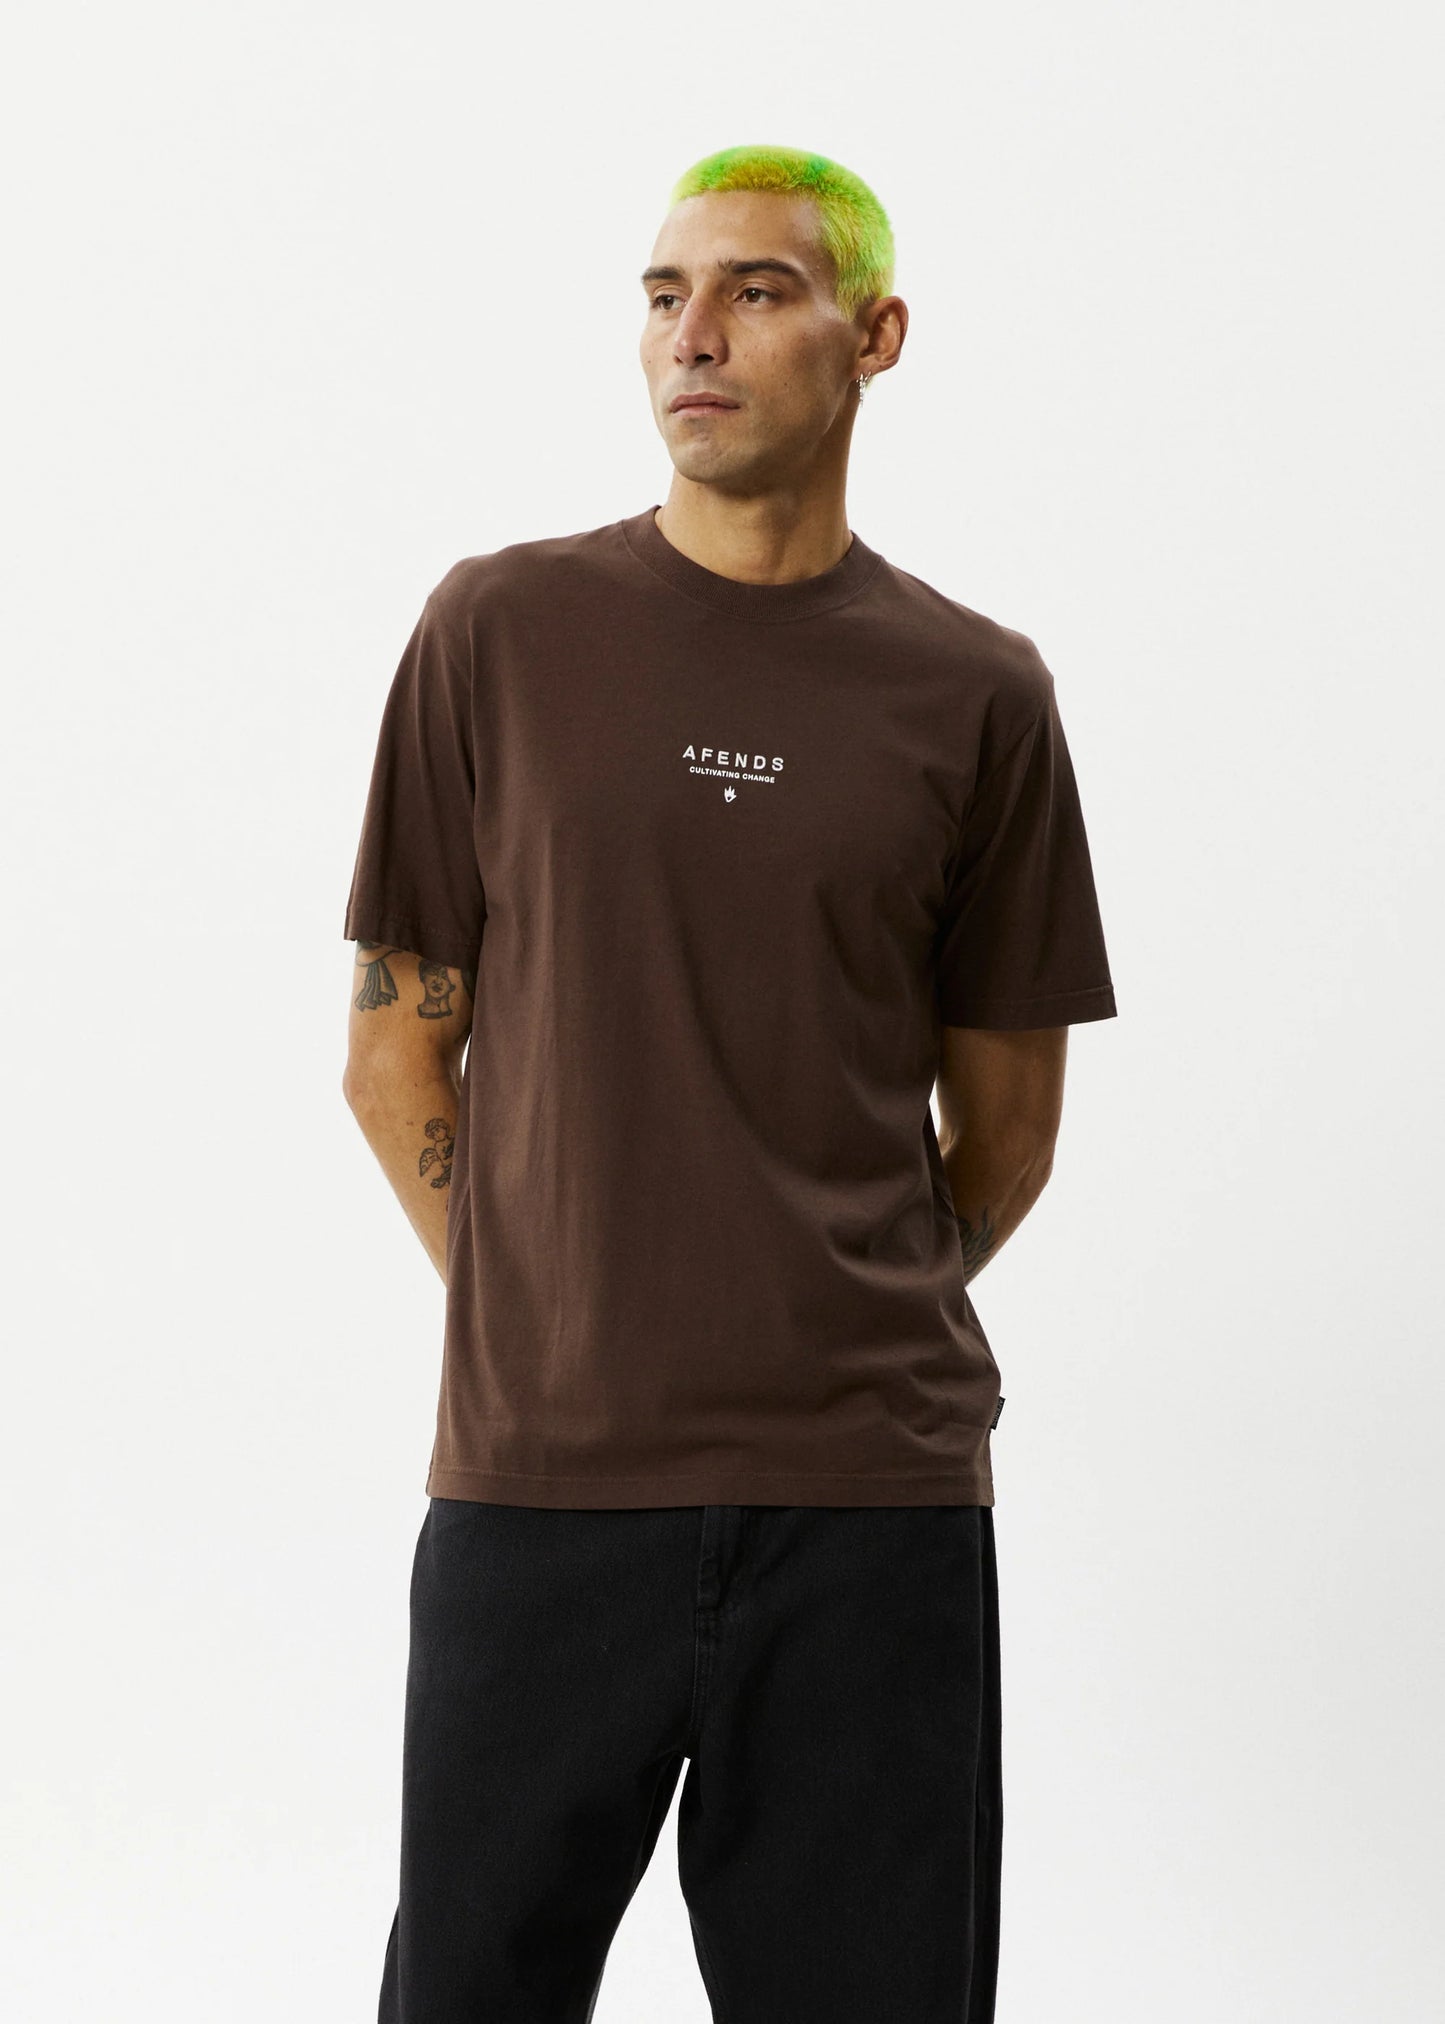 AFENDS Space Retro Fit Mens Tee - Coffee